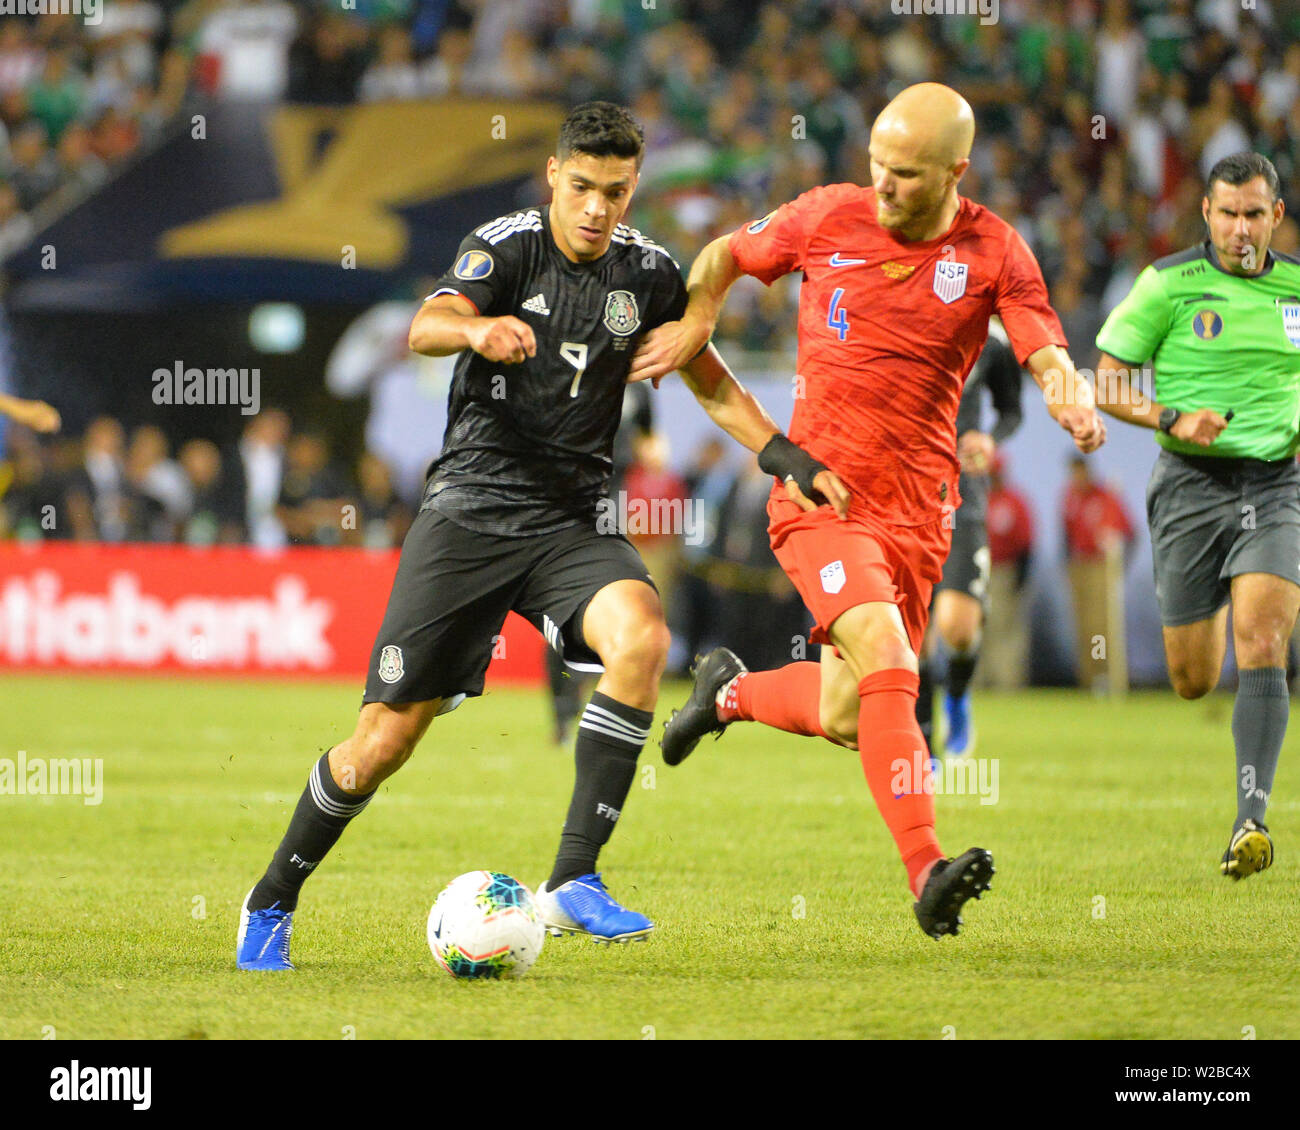 Chicago, IL, USA. 07th July, 2019. Mexico forward, Raul Jimenez (9), and US midfielder, Michael Bradley (4), work for ball control during the 2019 CONCACAF Gold Cup, championship match, between the United States and Mexico, at Soldier Field in Chicago, IL. Credit: Kevin Langley/CSM/Alamy Live News Stock Photo